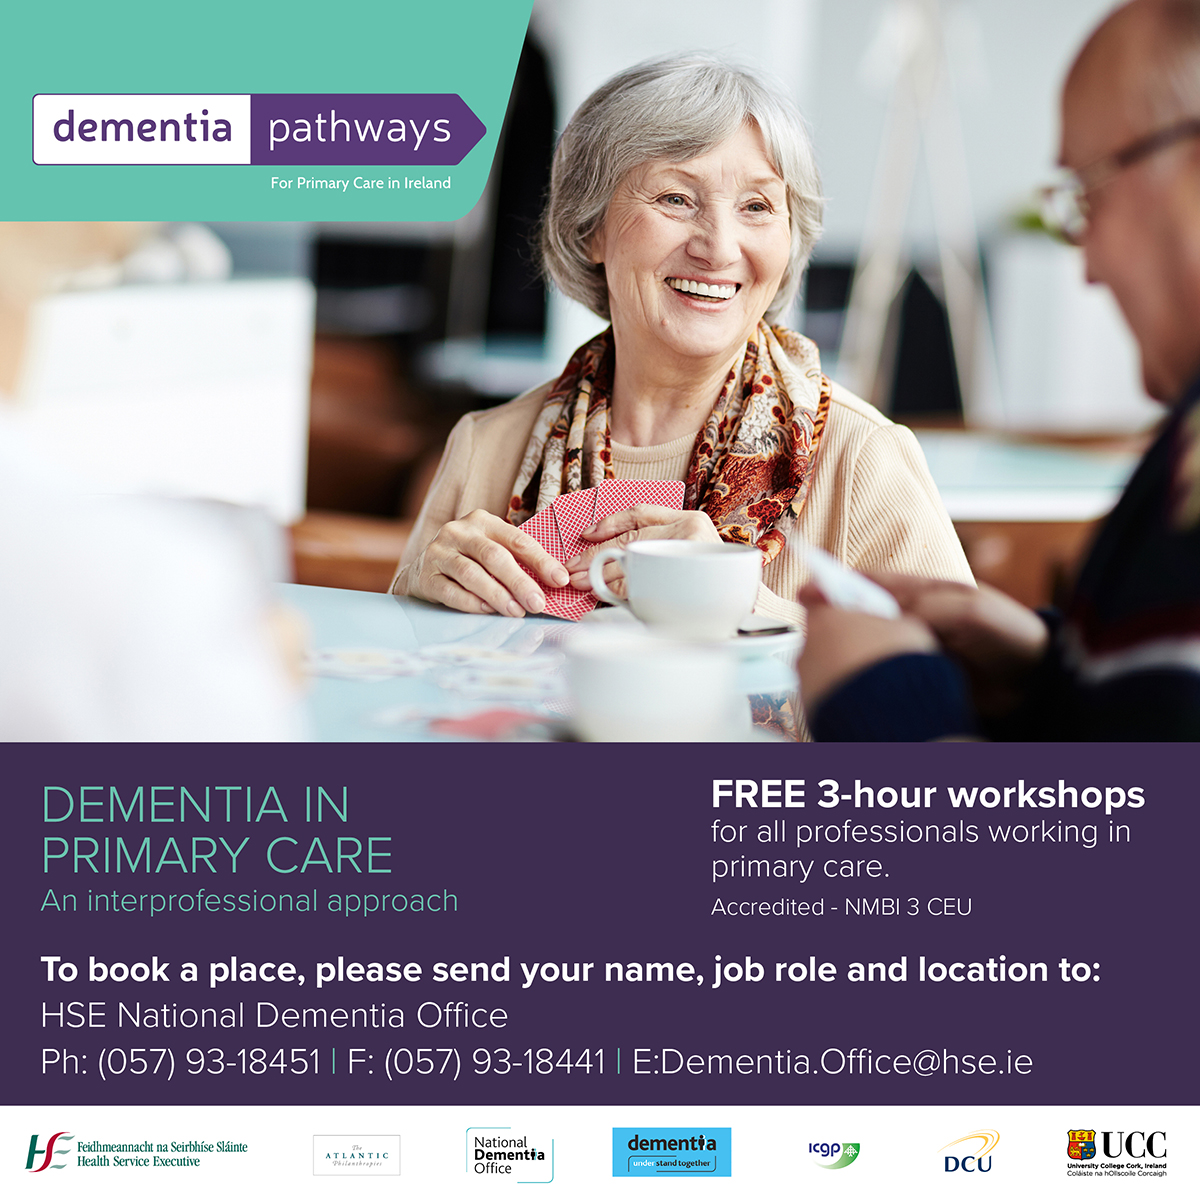 NEW! 2017 dementia training workshops for primary care